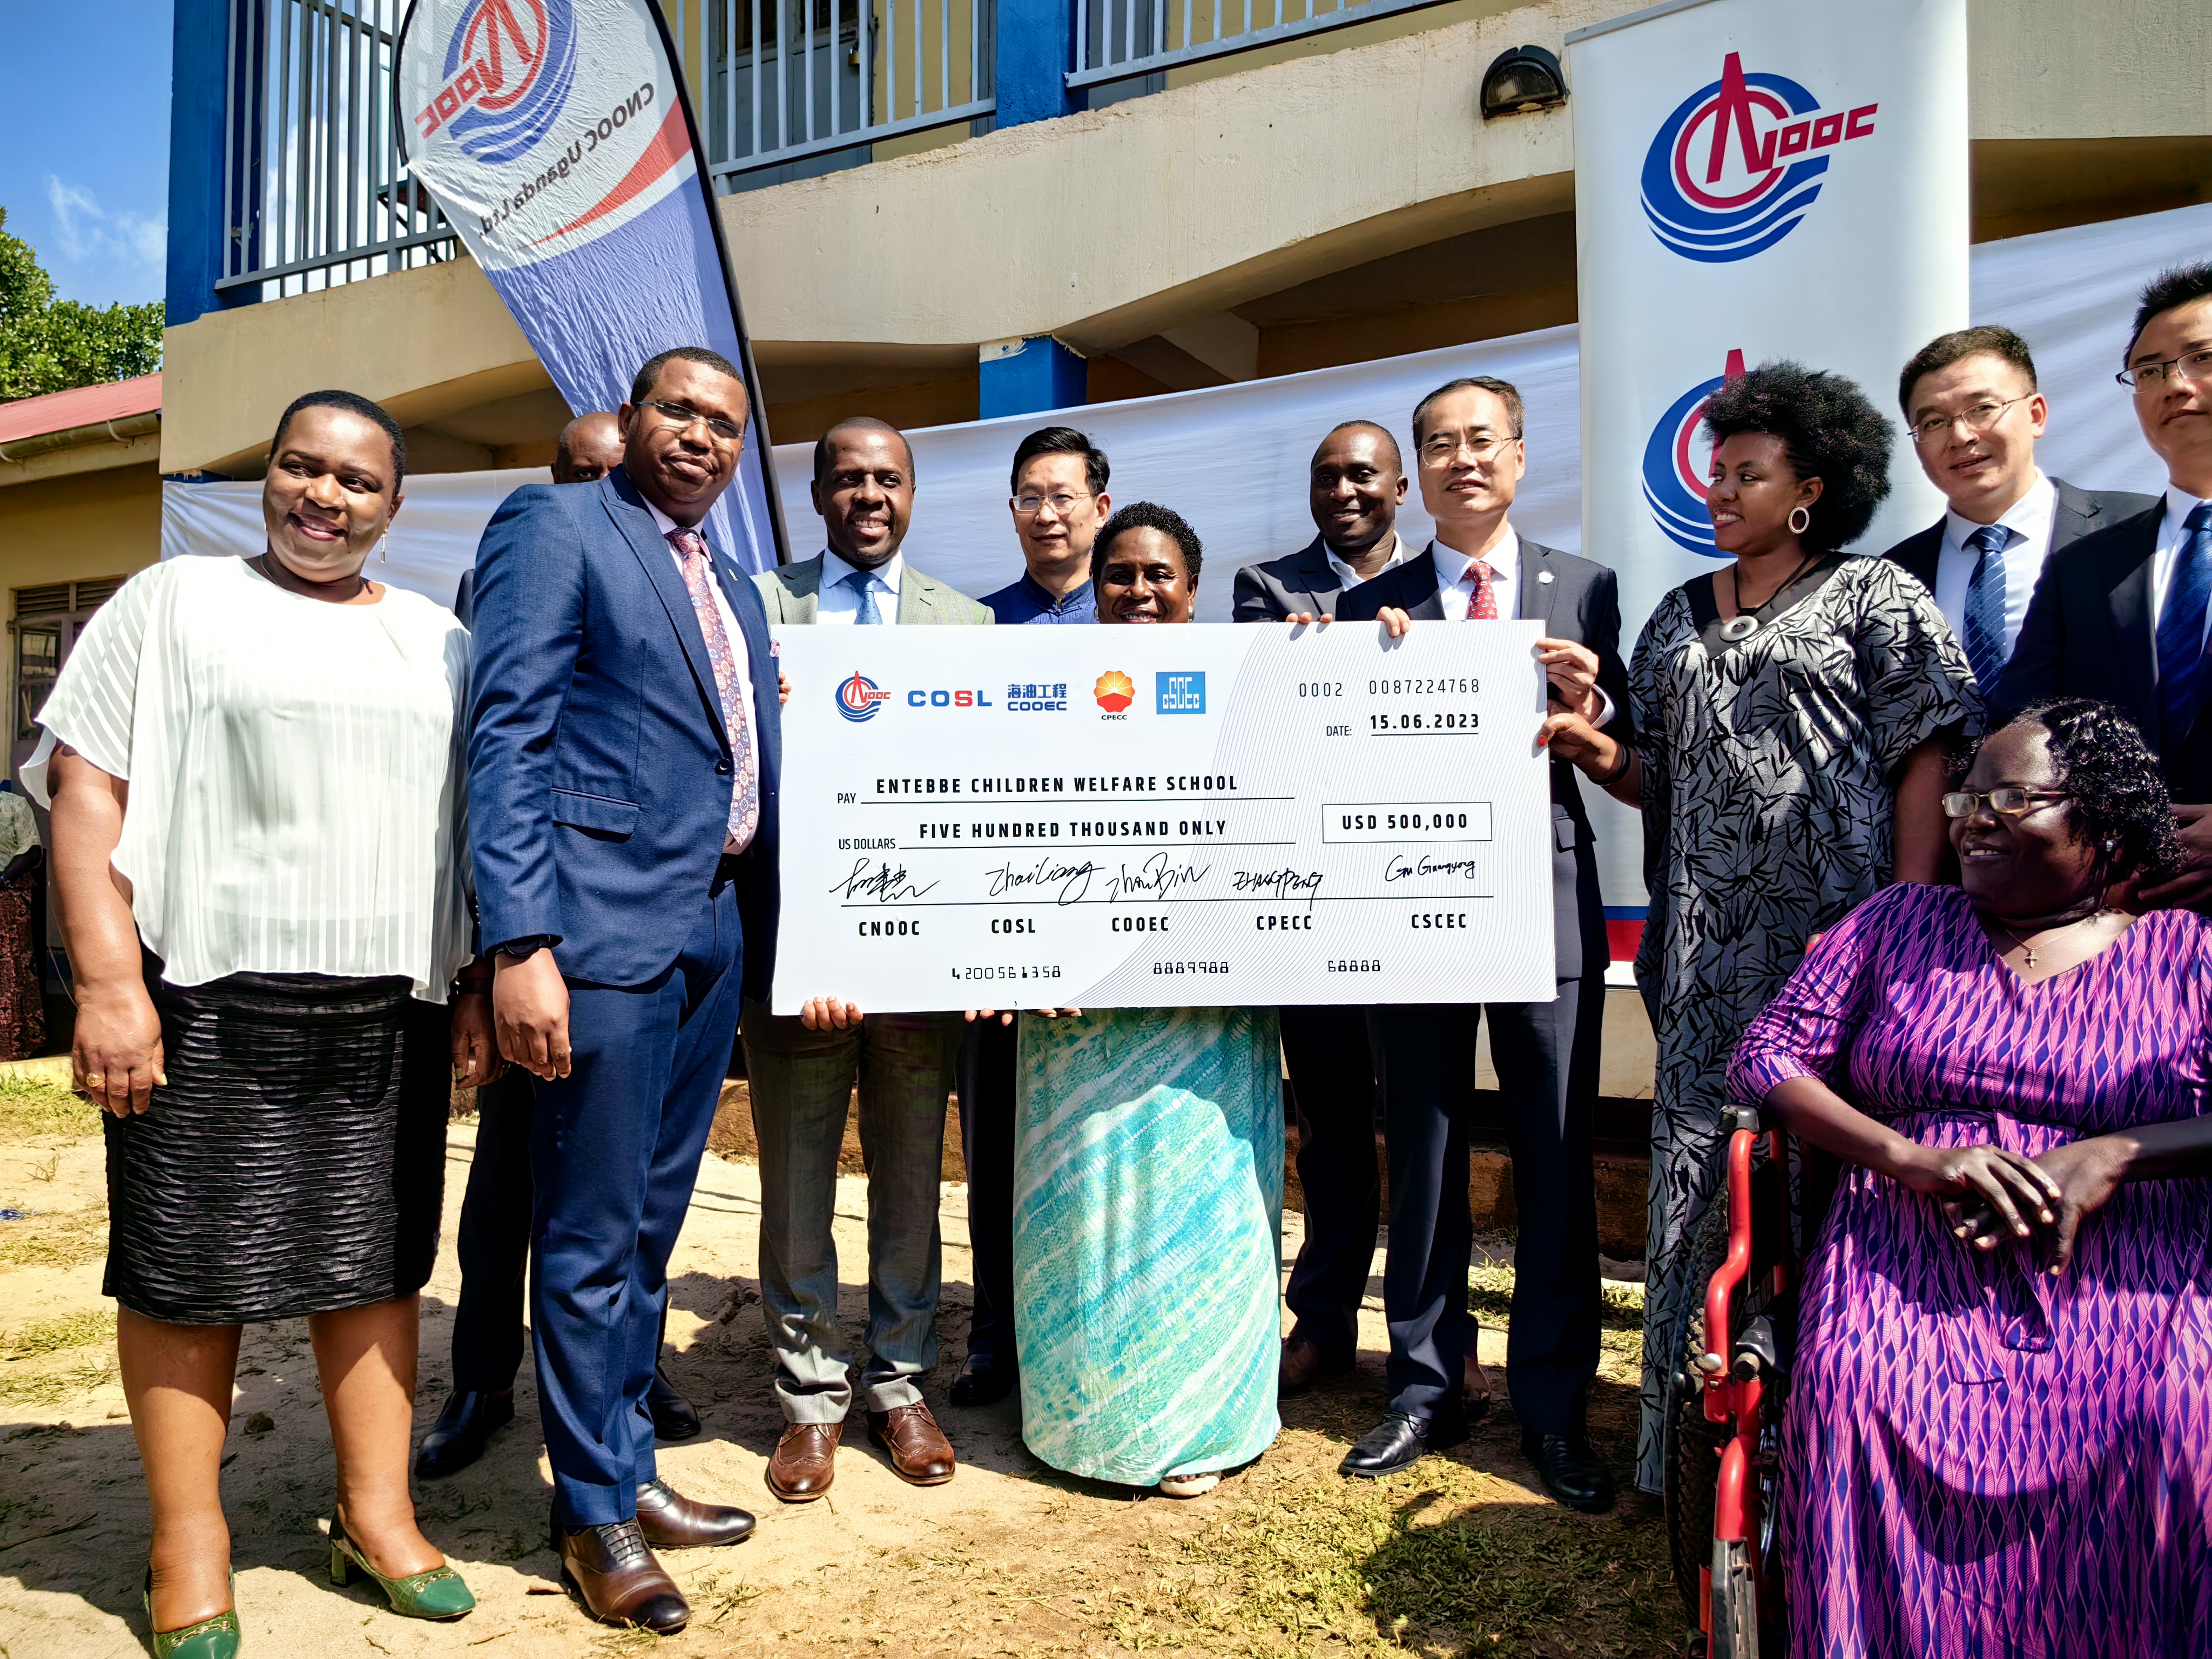 Chinese enterprises in Uganda made a significant donation of US $500,000 to Entebbe Children Welfare School, June 15, 2023. /CNOOC